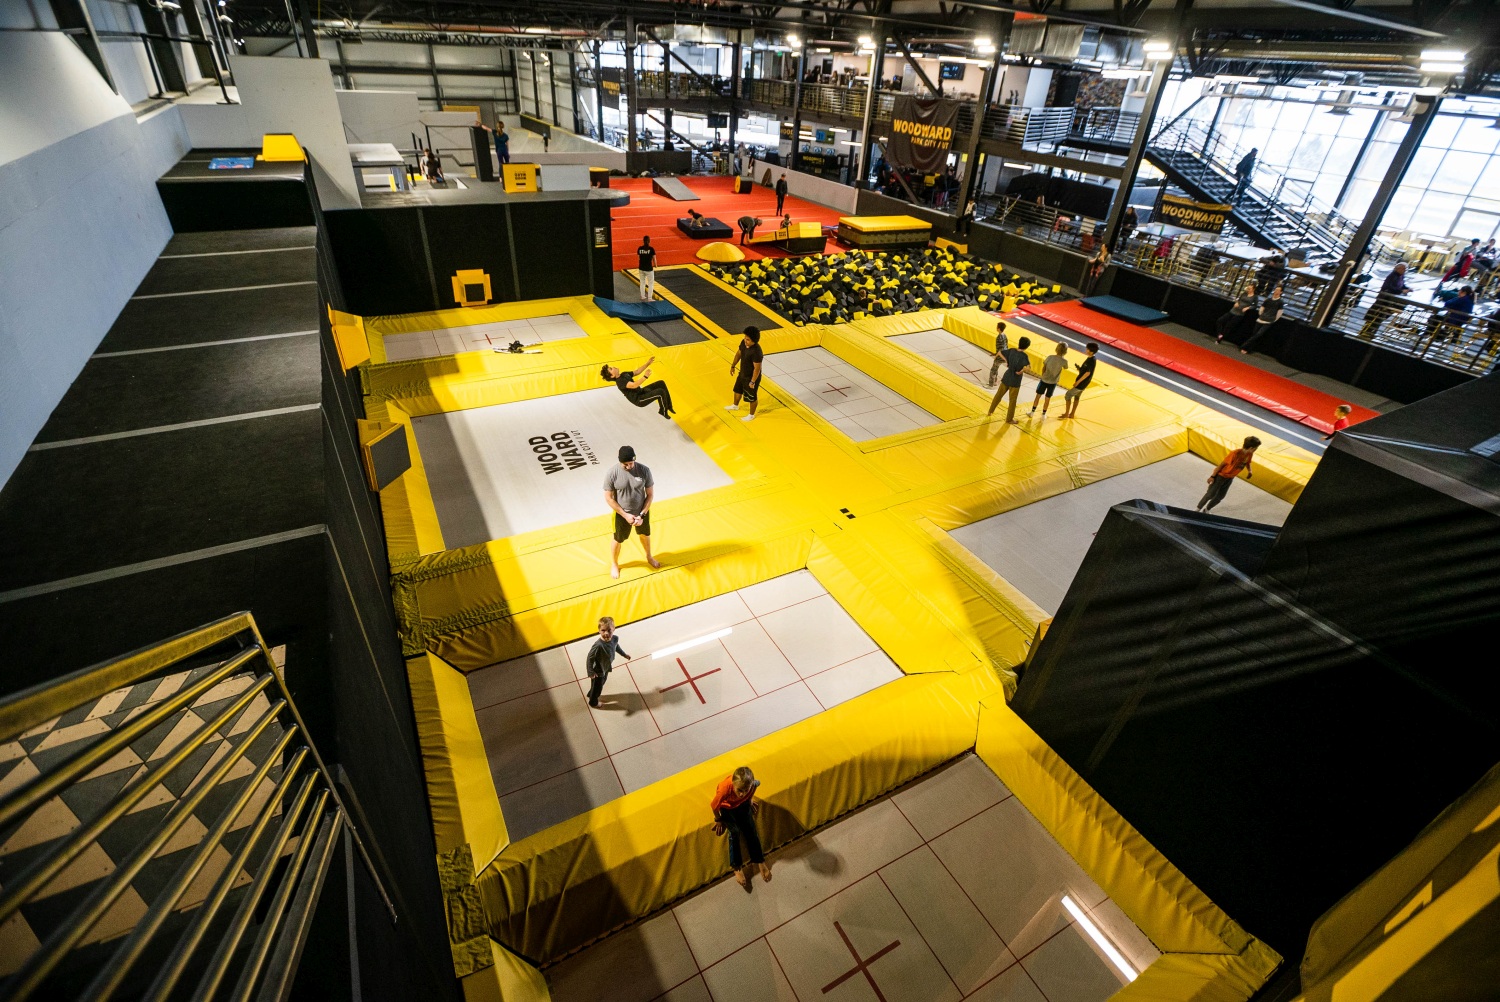 Kids and adults use the indoor trampoline park at Woodward Park City